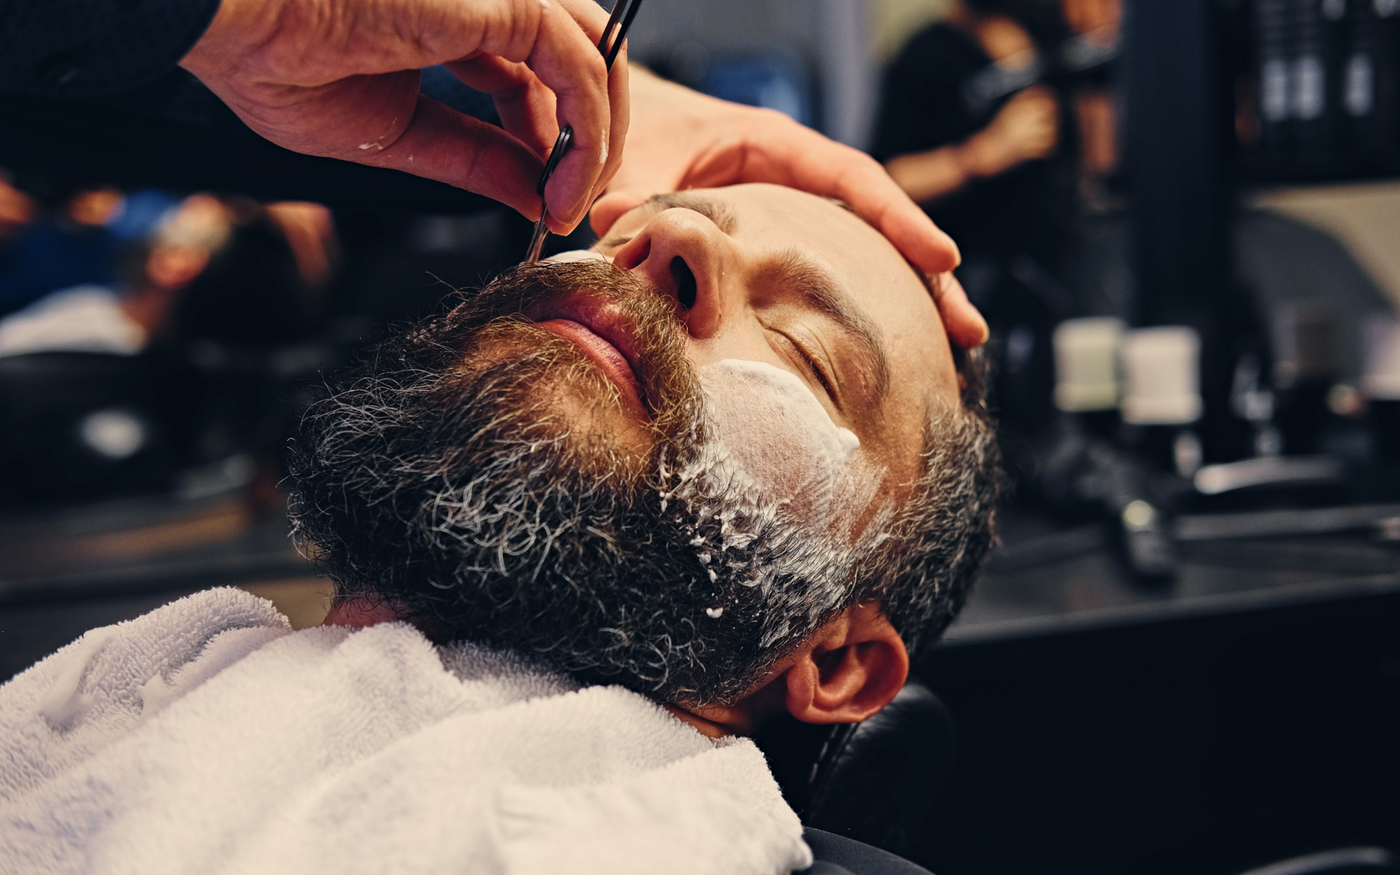 Dry vs. Wet Shaving: The Best Way for You